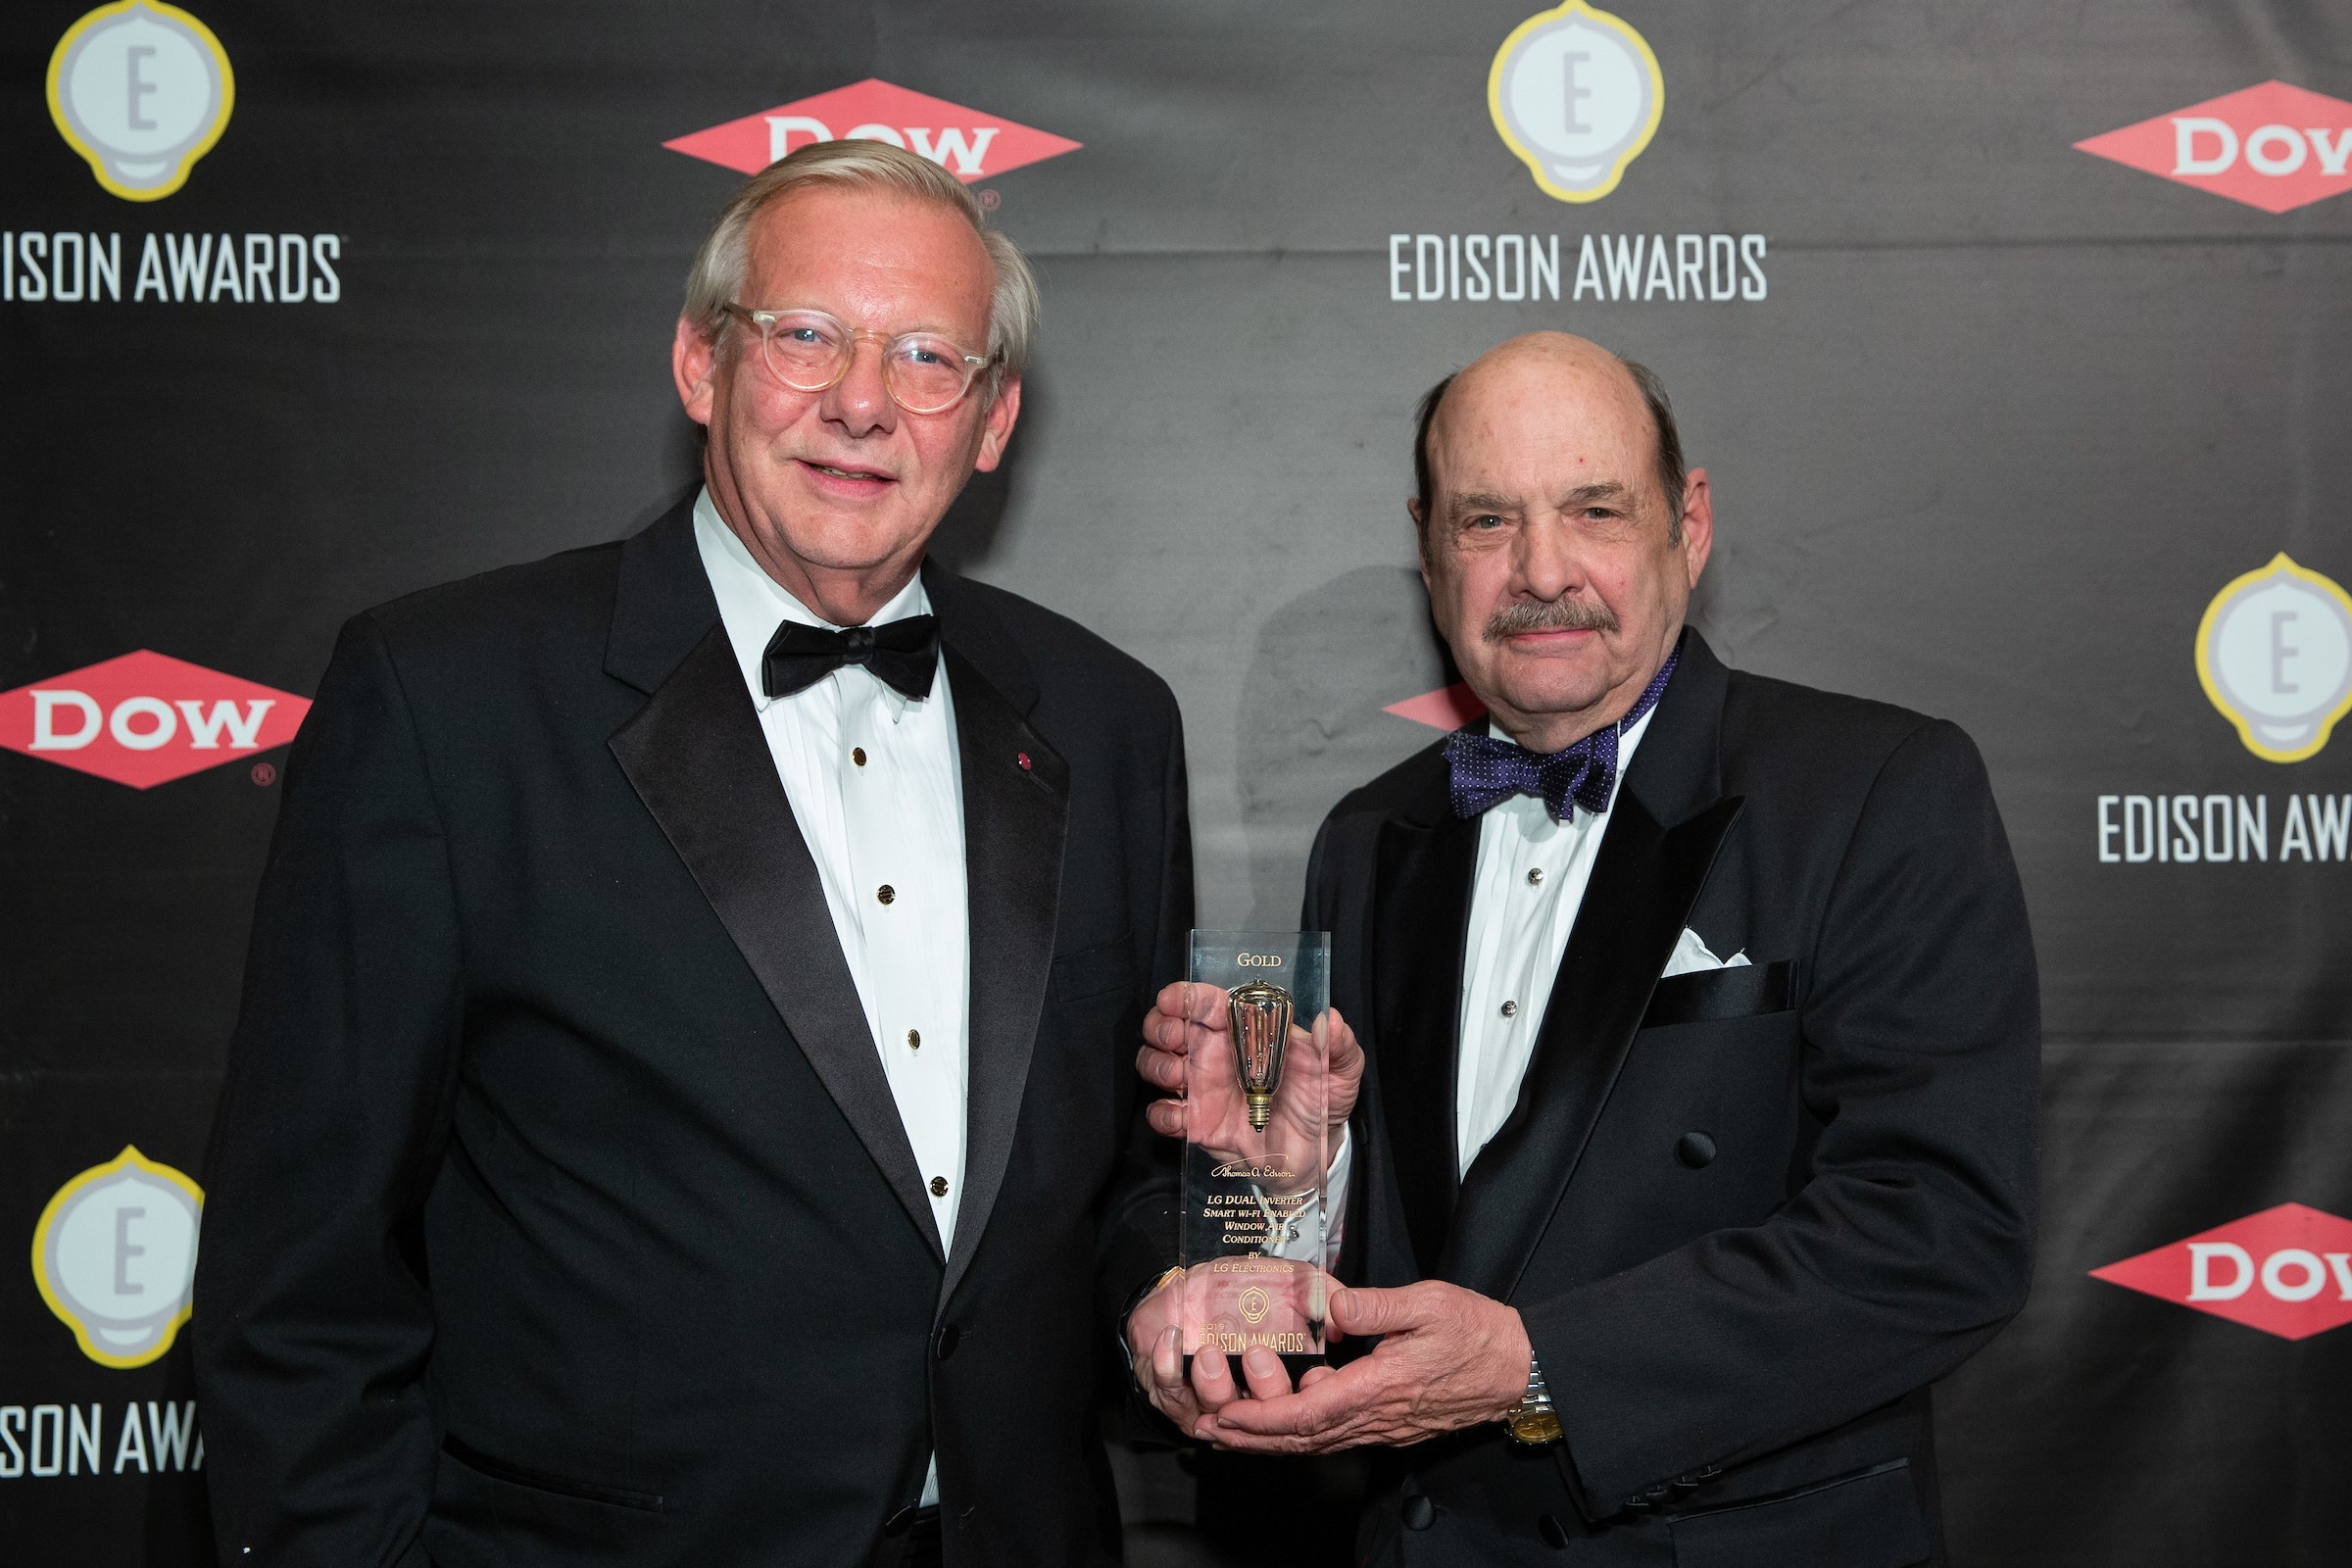 John Taylor, Senior Vice President of Public Affairs for LG USA receives the trophy from the representative of 2019 Gold Edison Award.